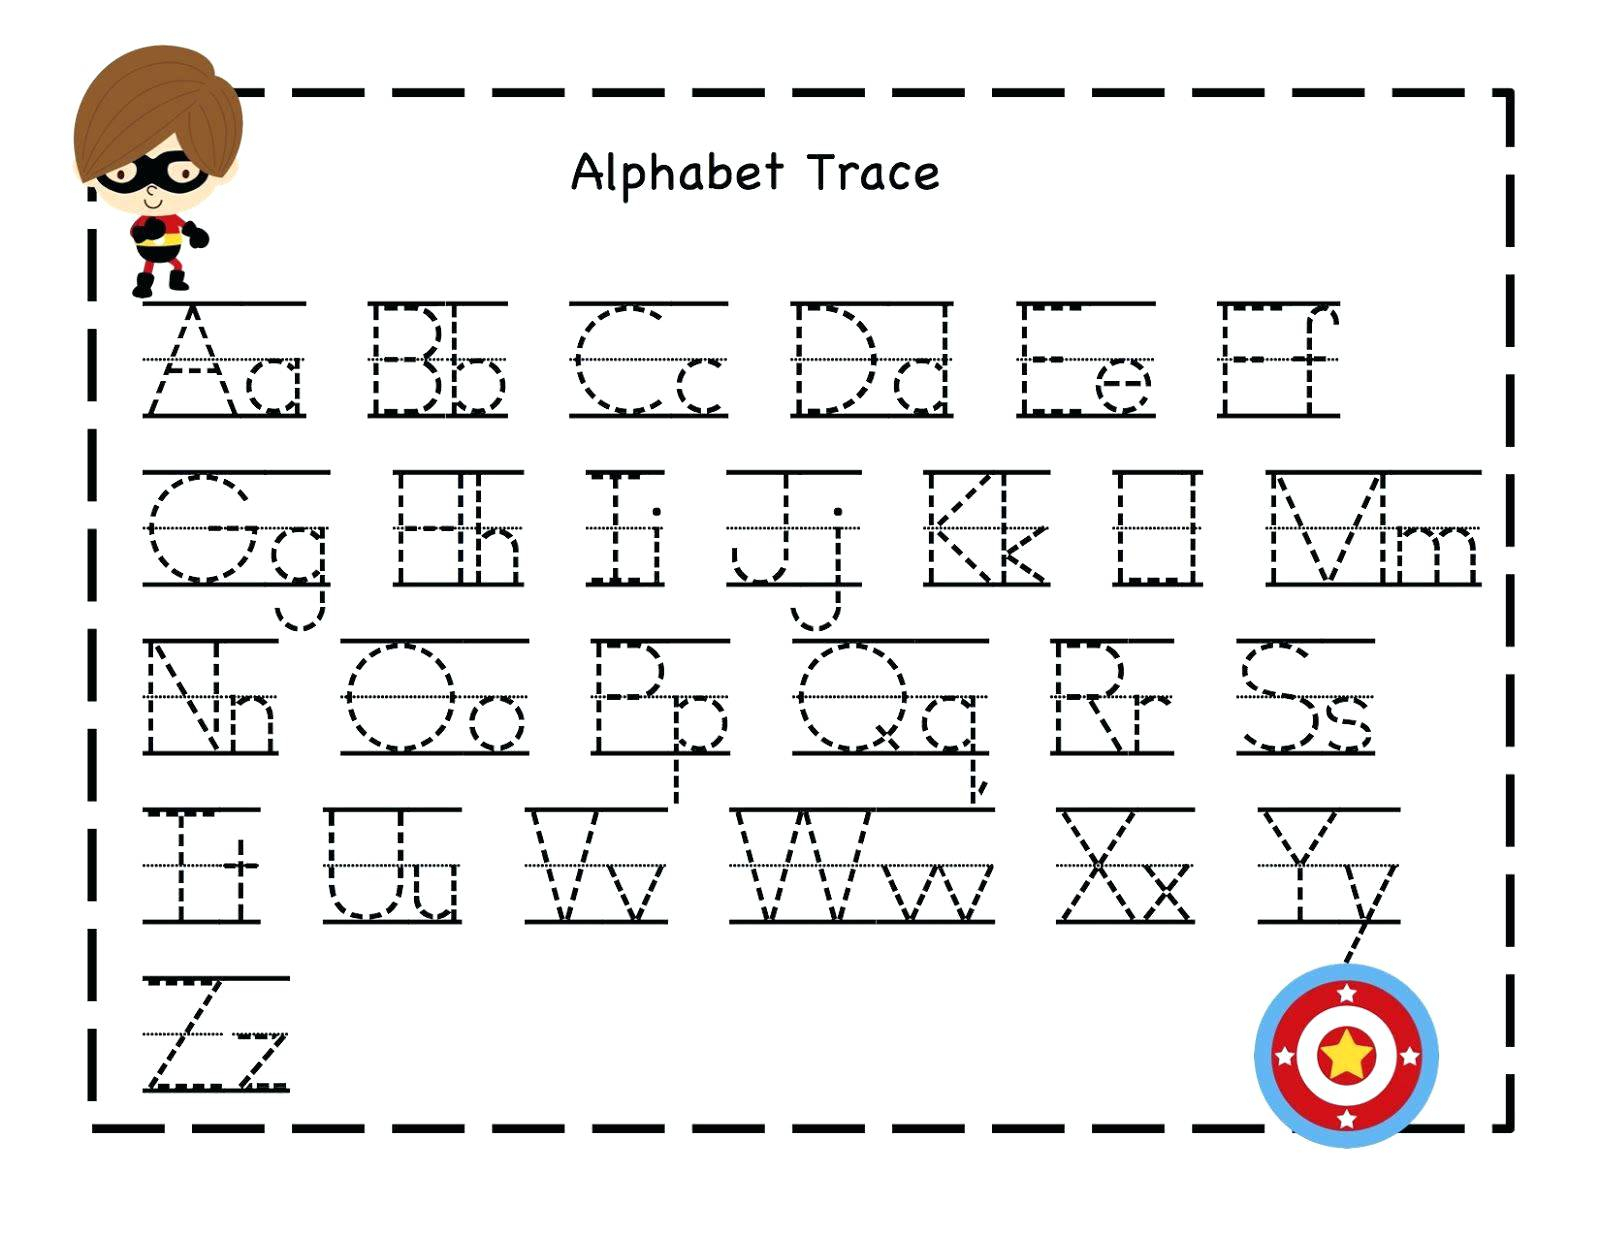 Printable Tracing Worksheet For 3 Years Old | Printable within Alphabet Tracing For 4 Year Old